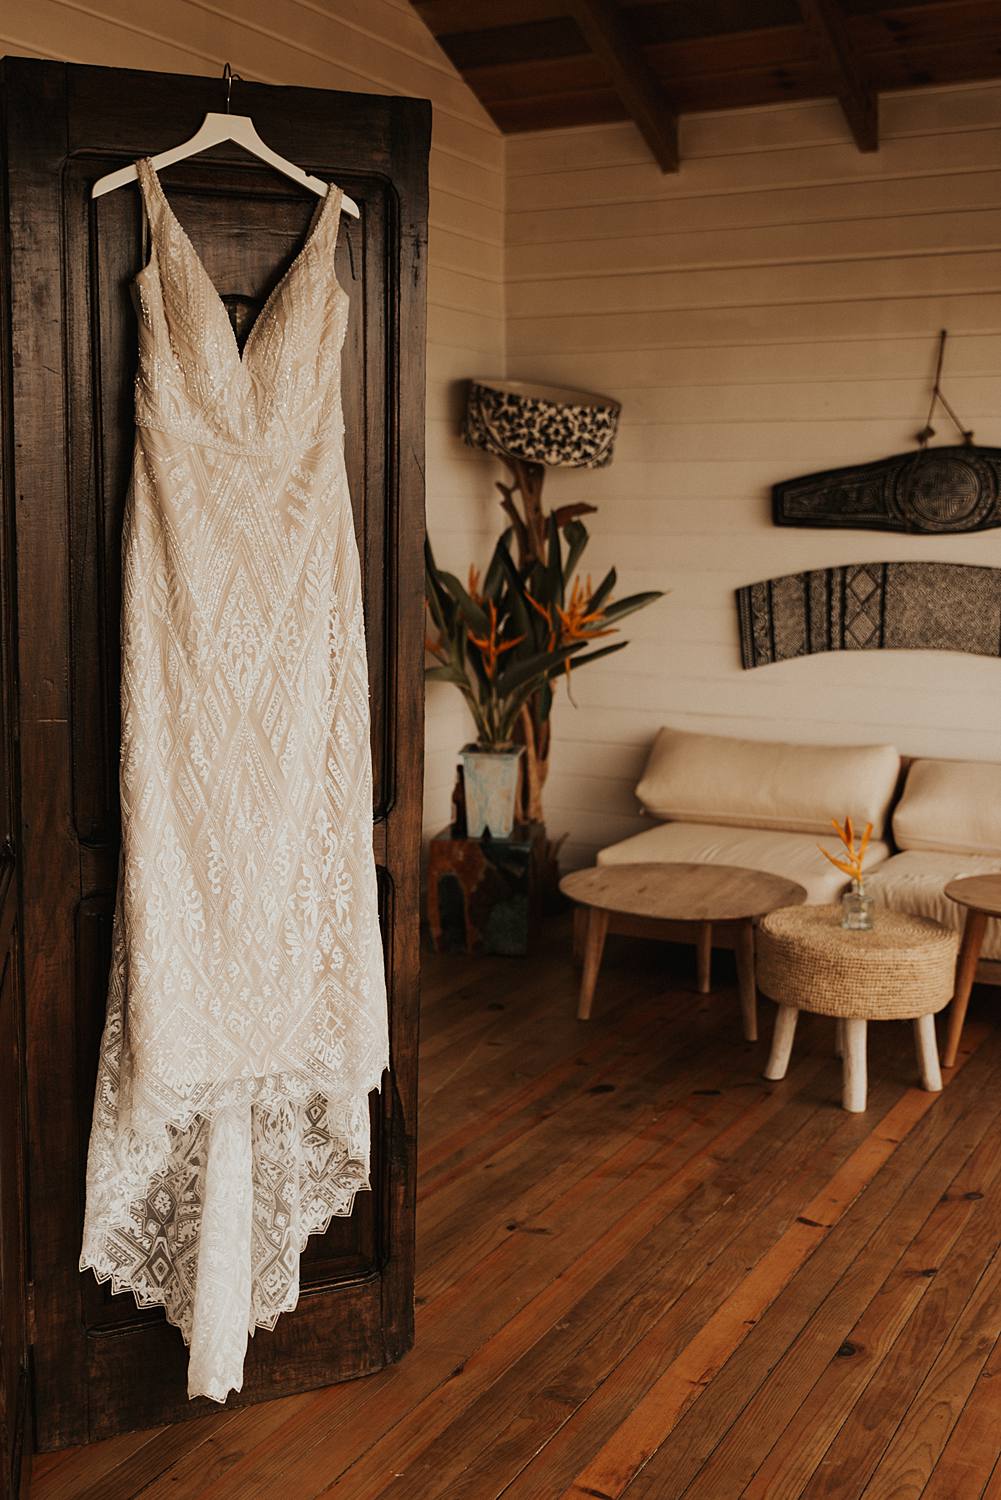 Lace wedding dress hanging in tropical boutique hotel